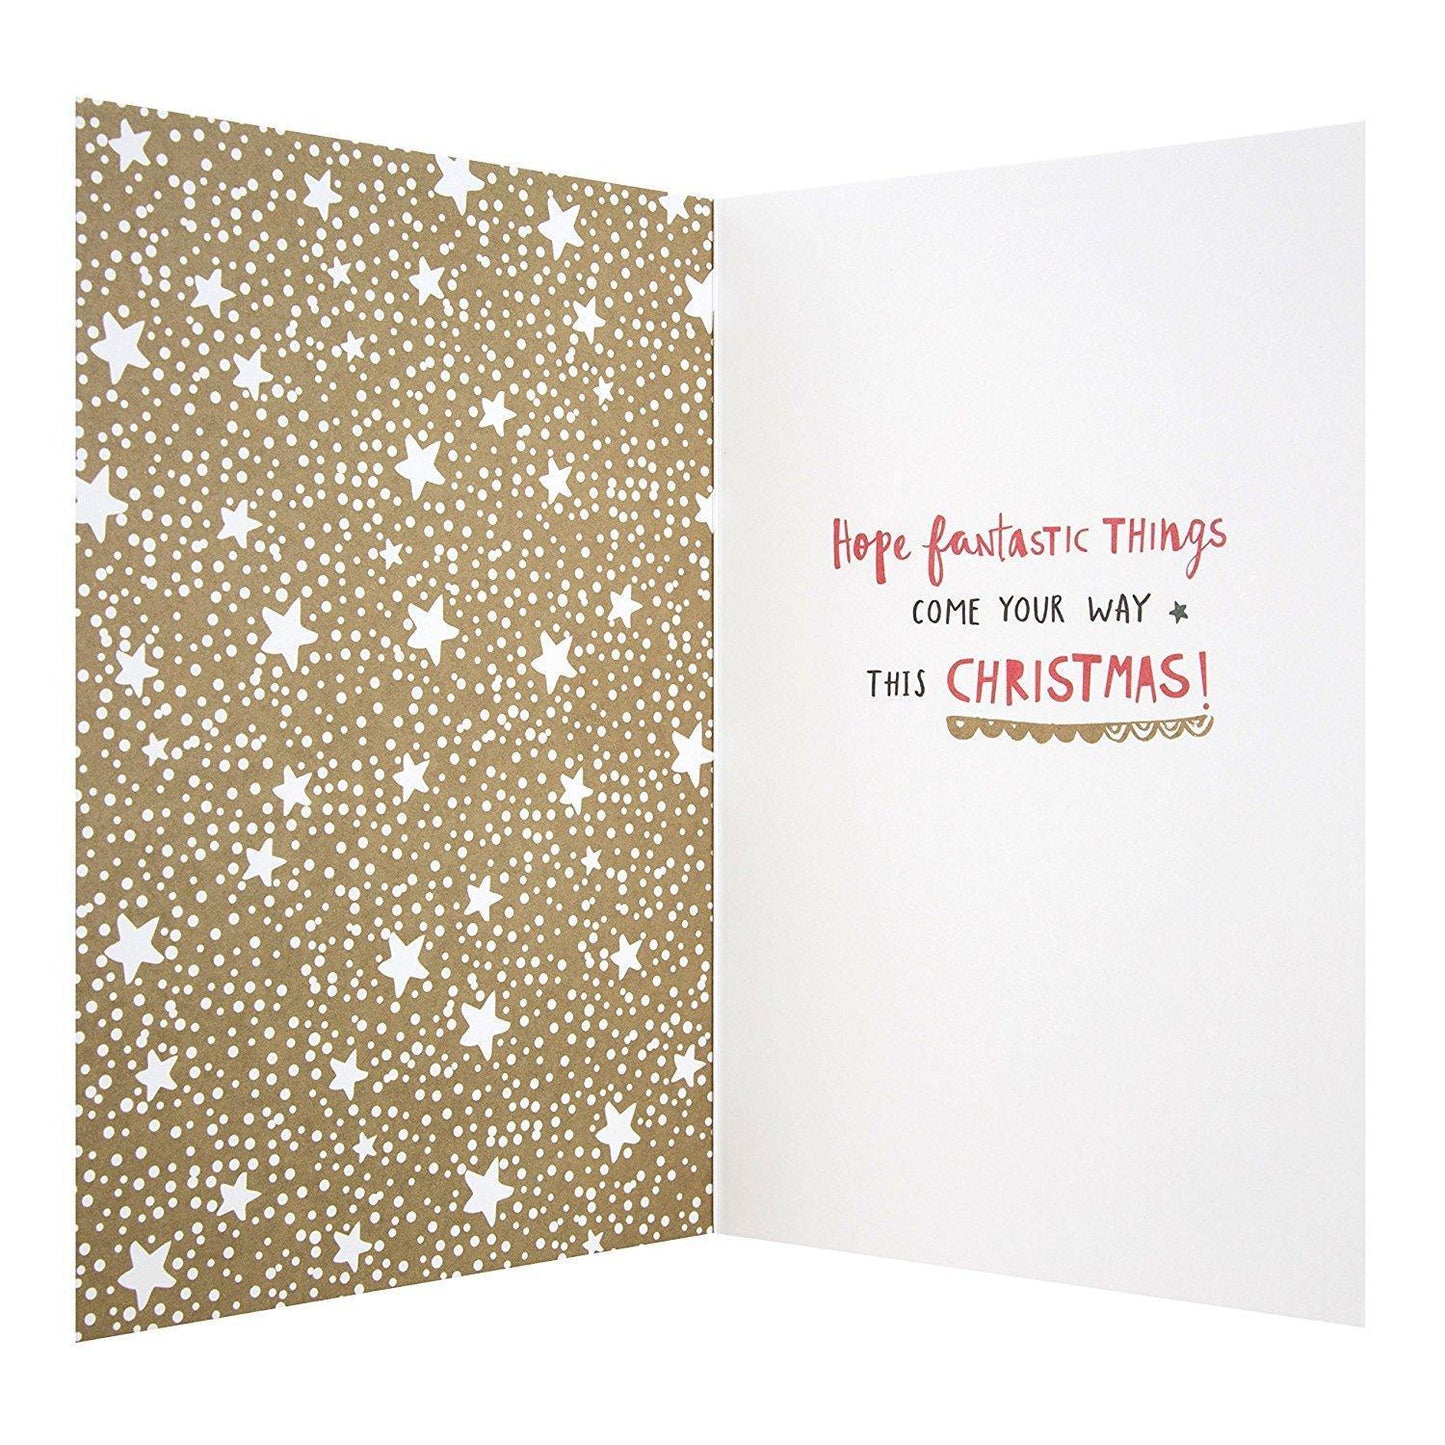 To All "Fantastic Things" Christmas Card 